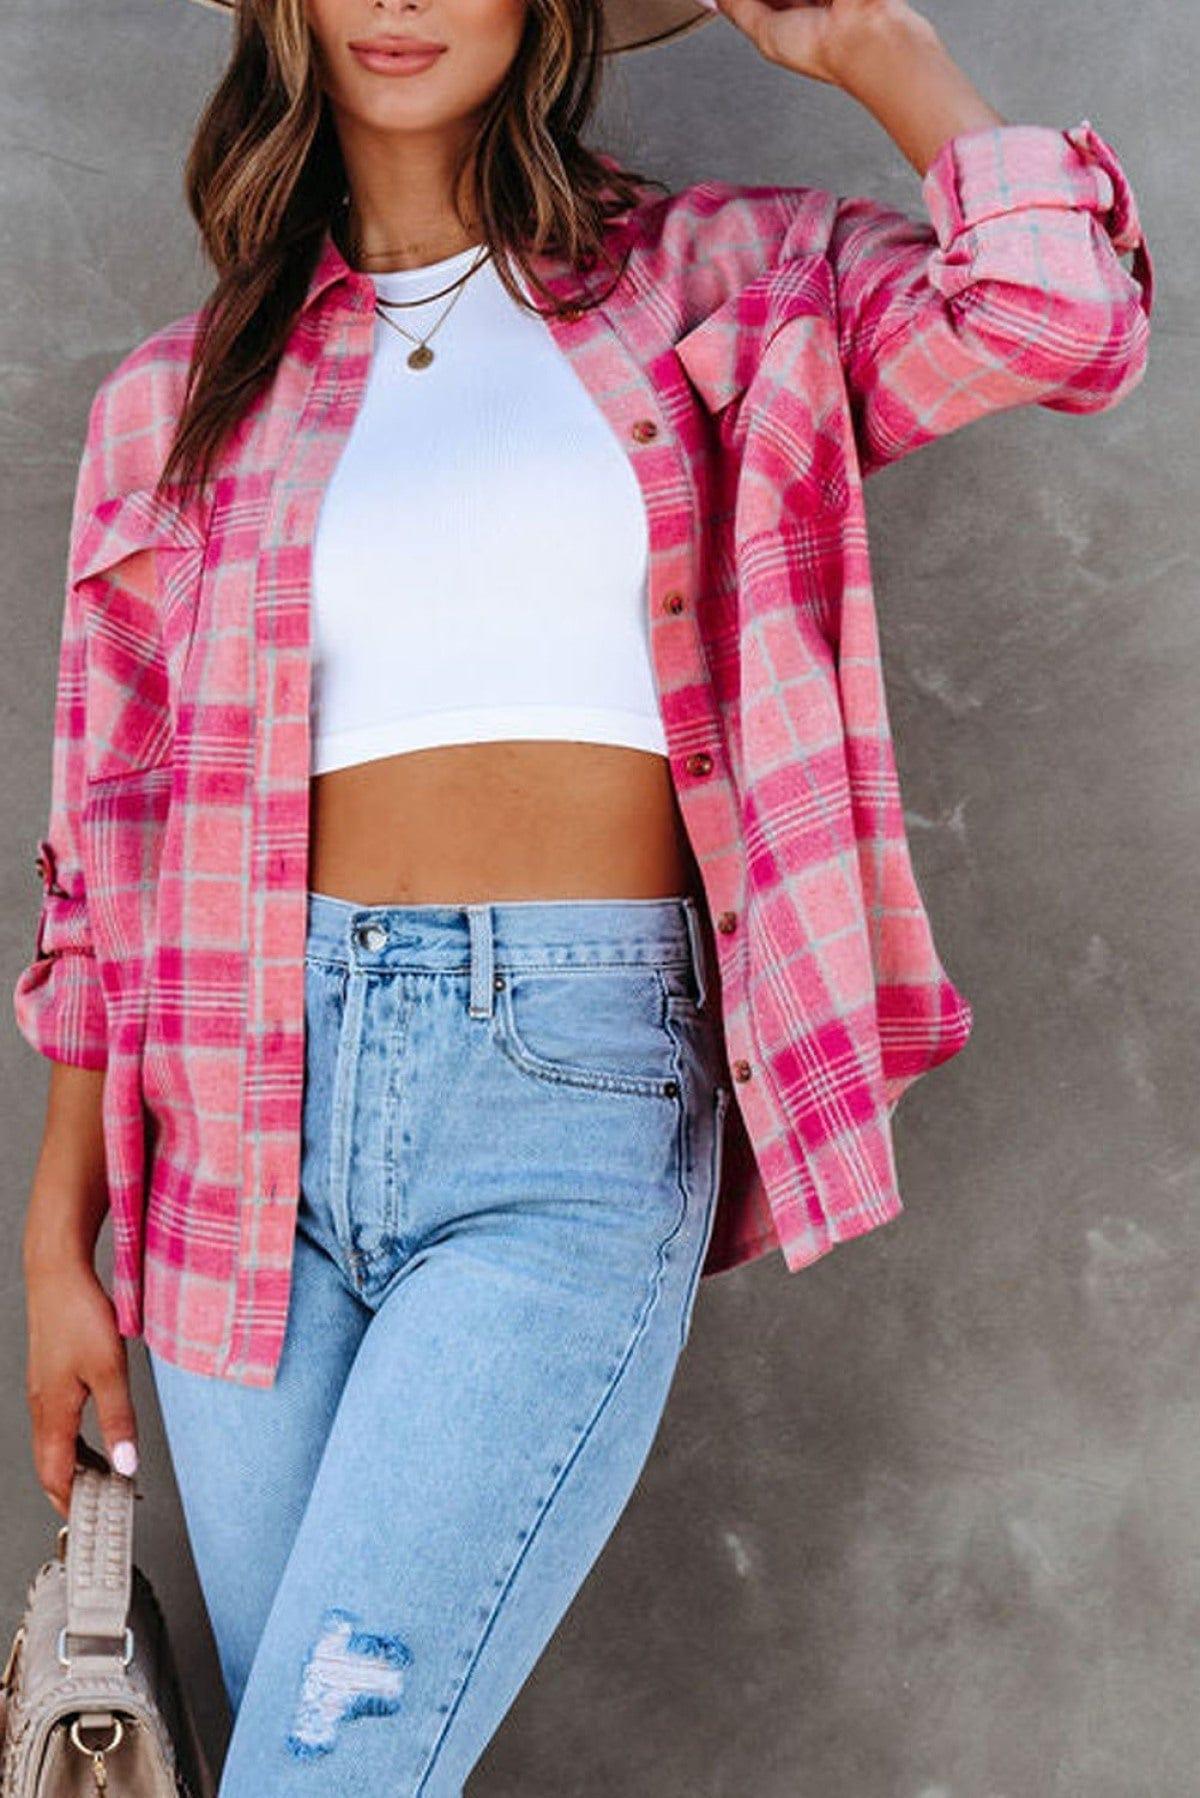 French Style Plaid Button Up Shirt Pink